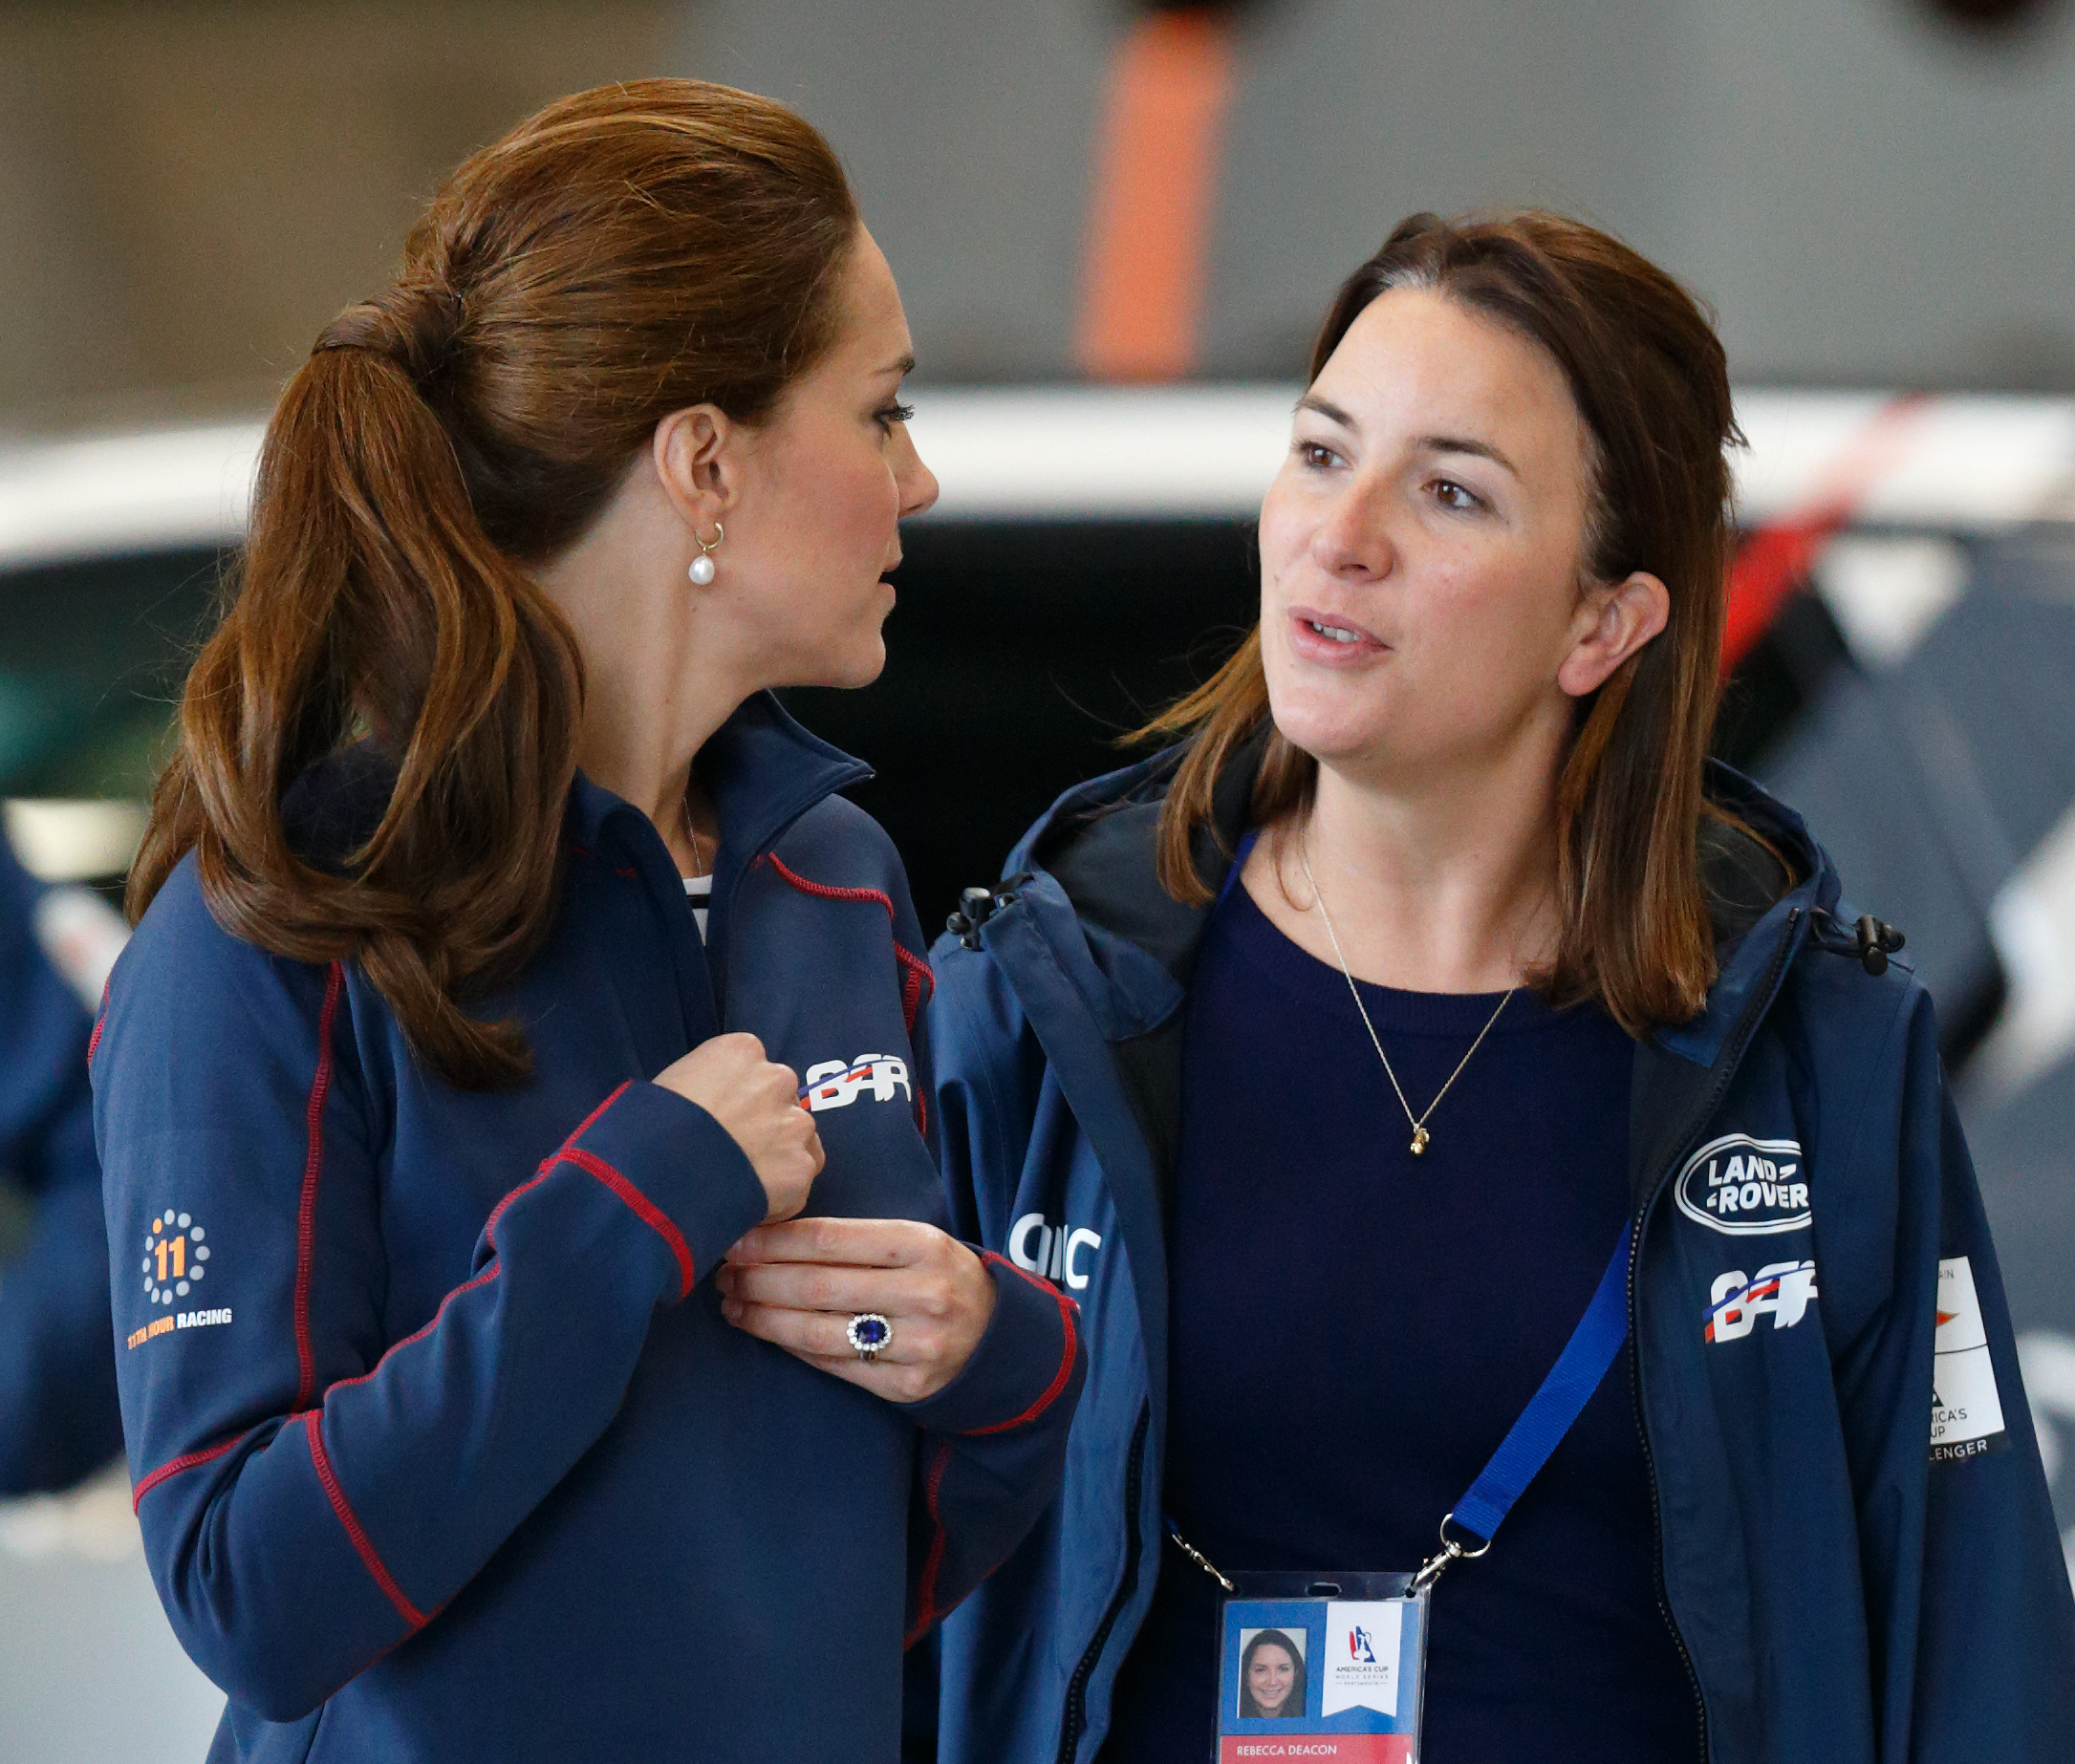 PHOTO: Catherine, Duchess of Cambridge, accompanied by her Private Secretary Rebecca Deacon, visits the Ben Ainslie Racing (Land Rover BAR) team base as she attends the America's Cup World Series event, July 26, 2015, in Portsmouth, England.